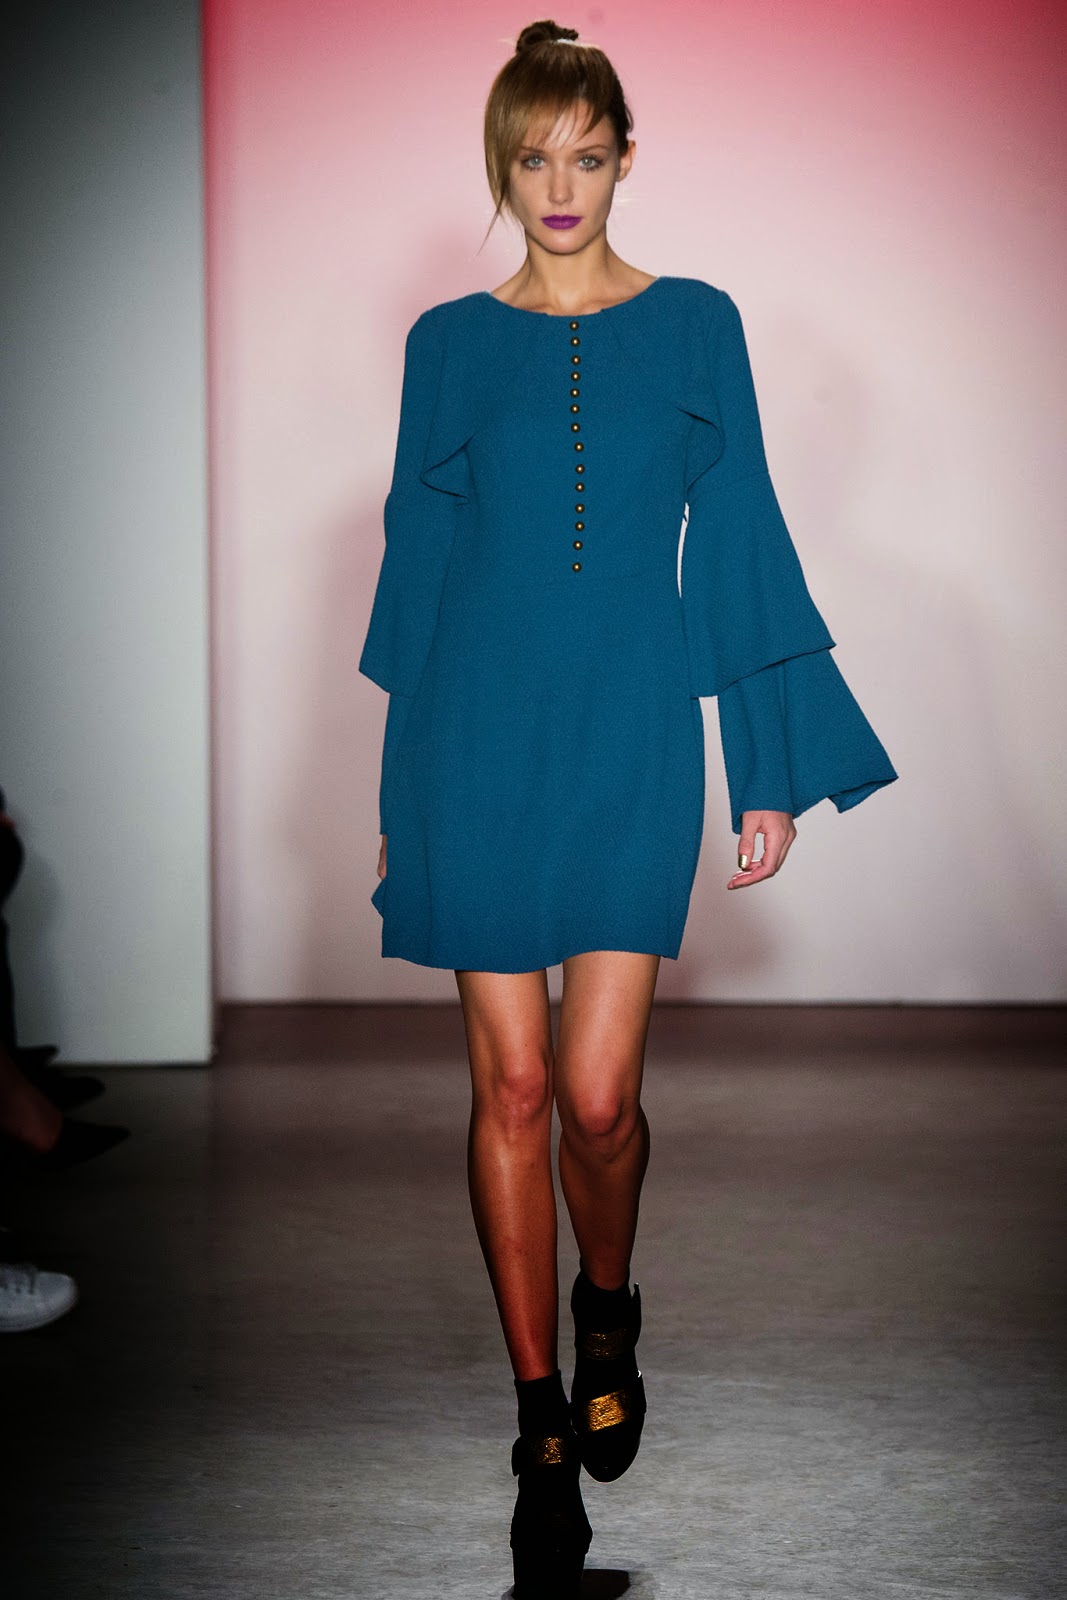 Serendipitylands: NANETTE LEPORE - FASHION SHOWS NEW YORK FALL 2015